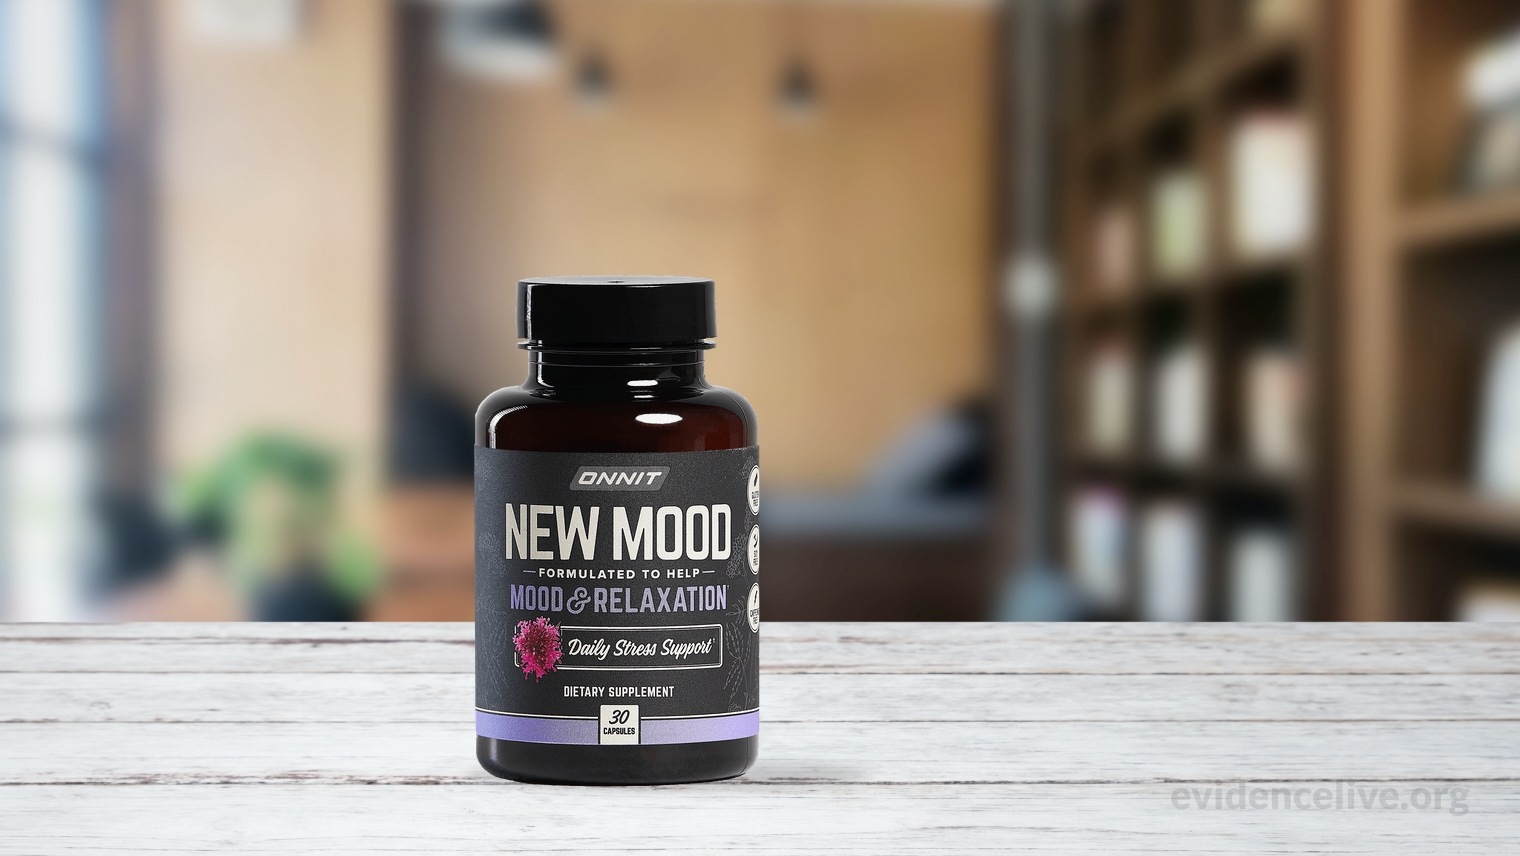 New Mood benefits and effects